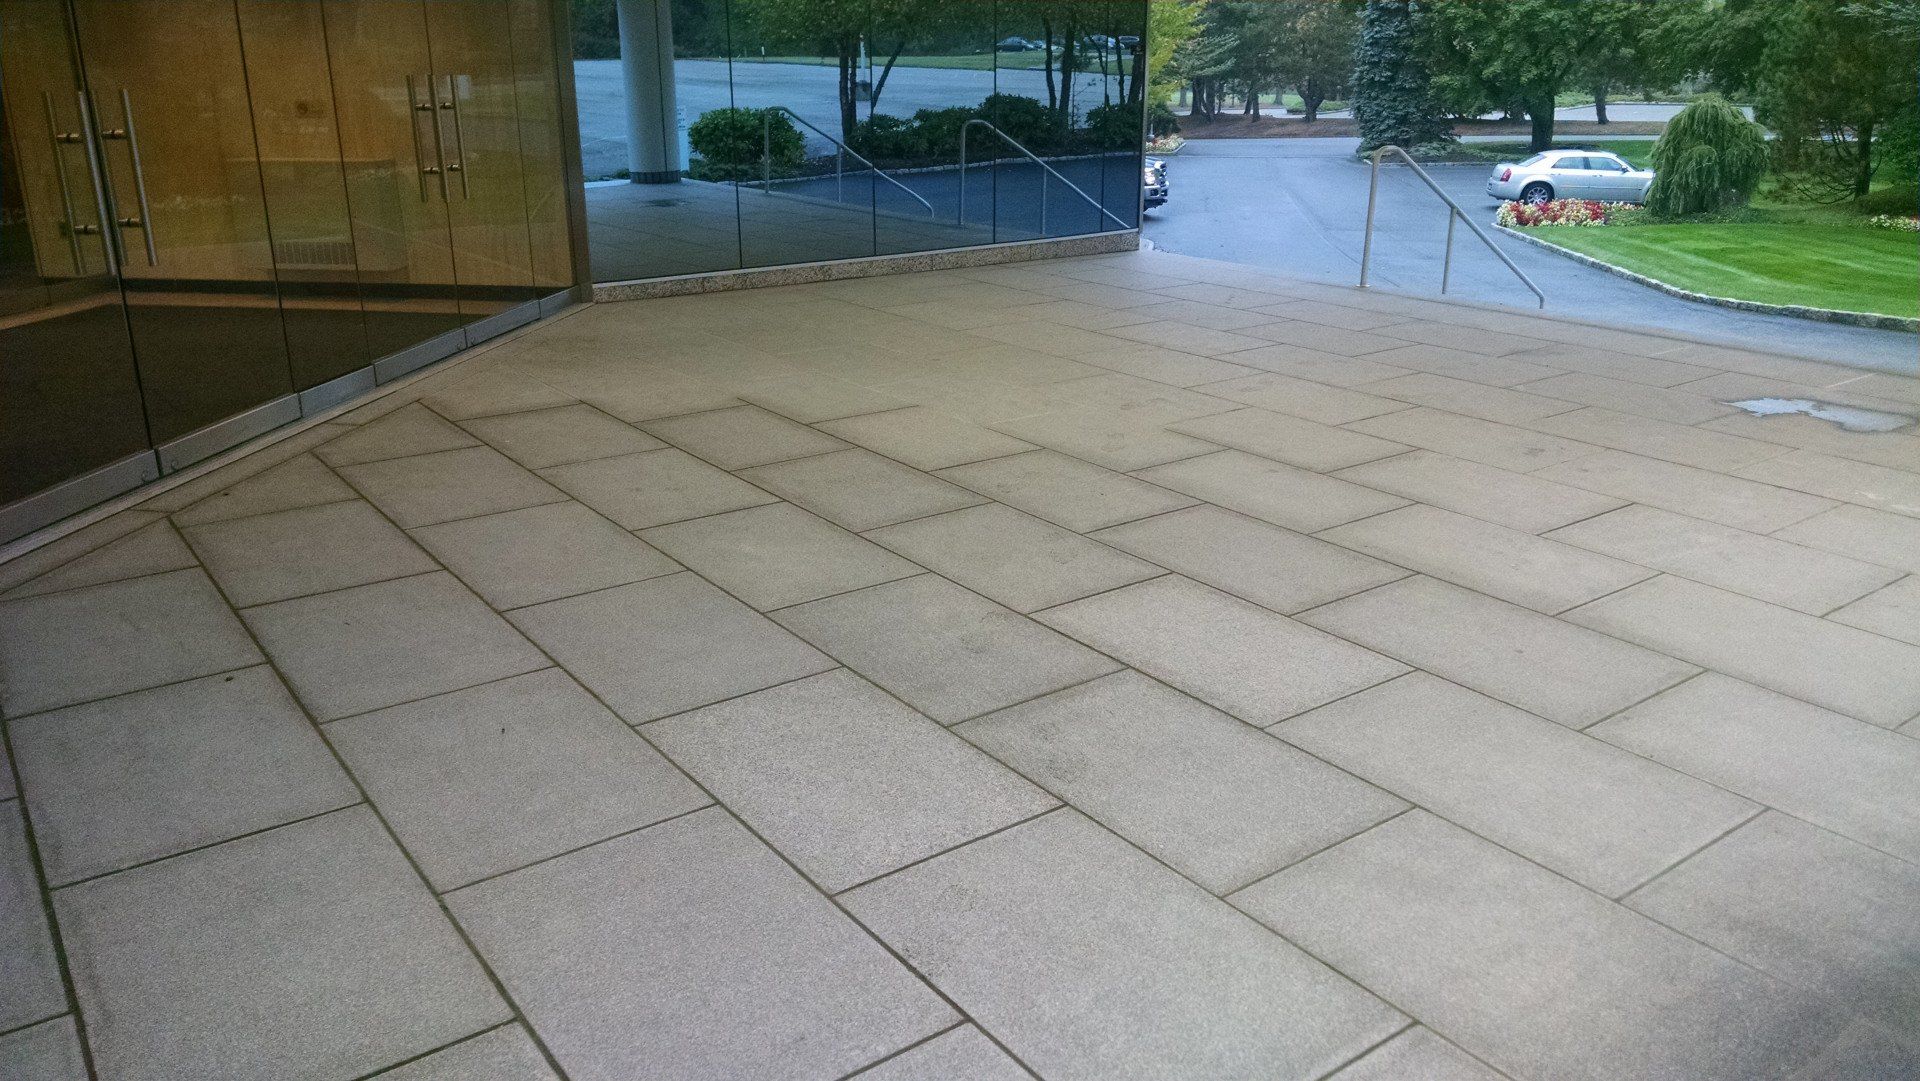 Concrete Entry Area to Office Building - Hardscaping in Bedford Hills, NY